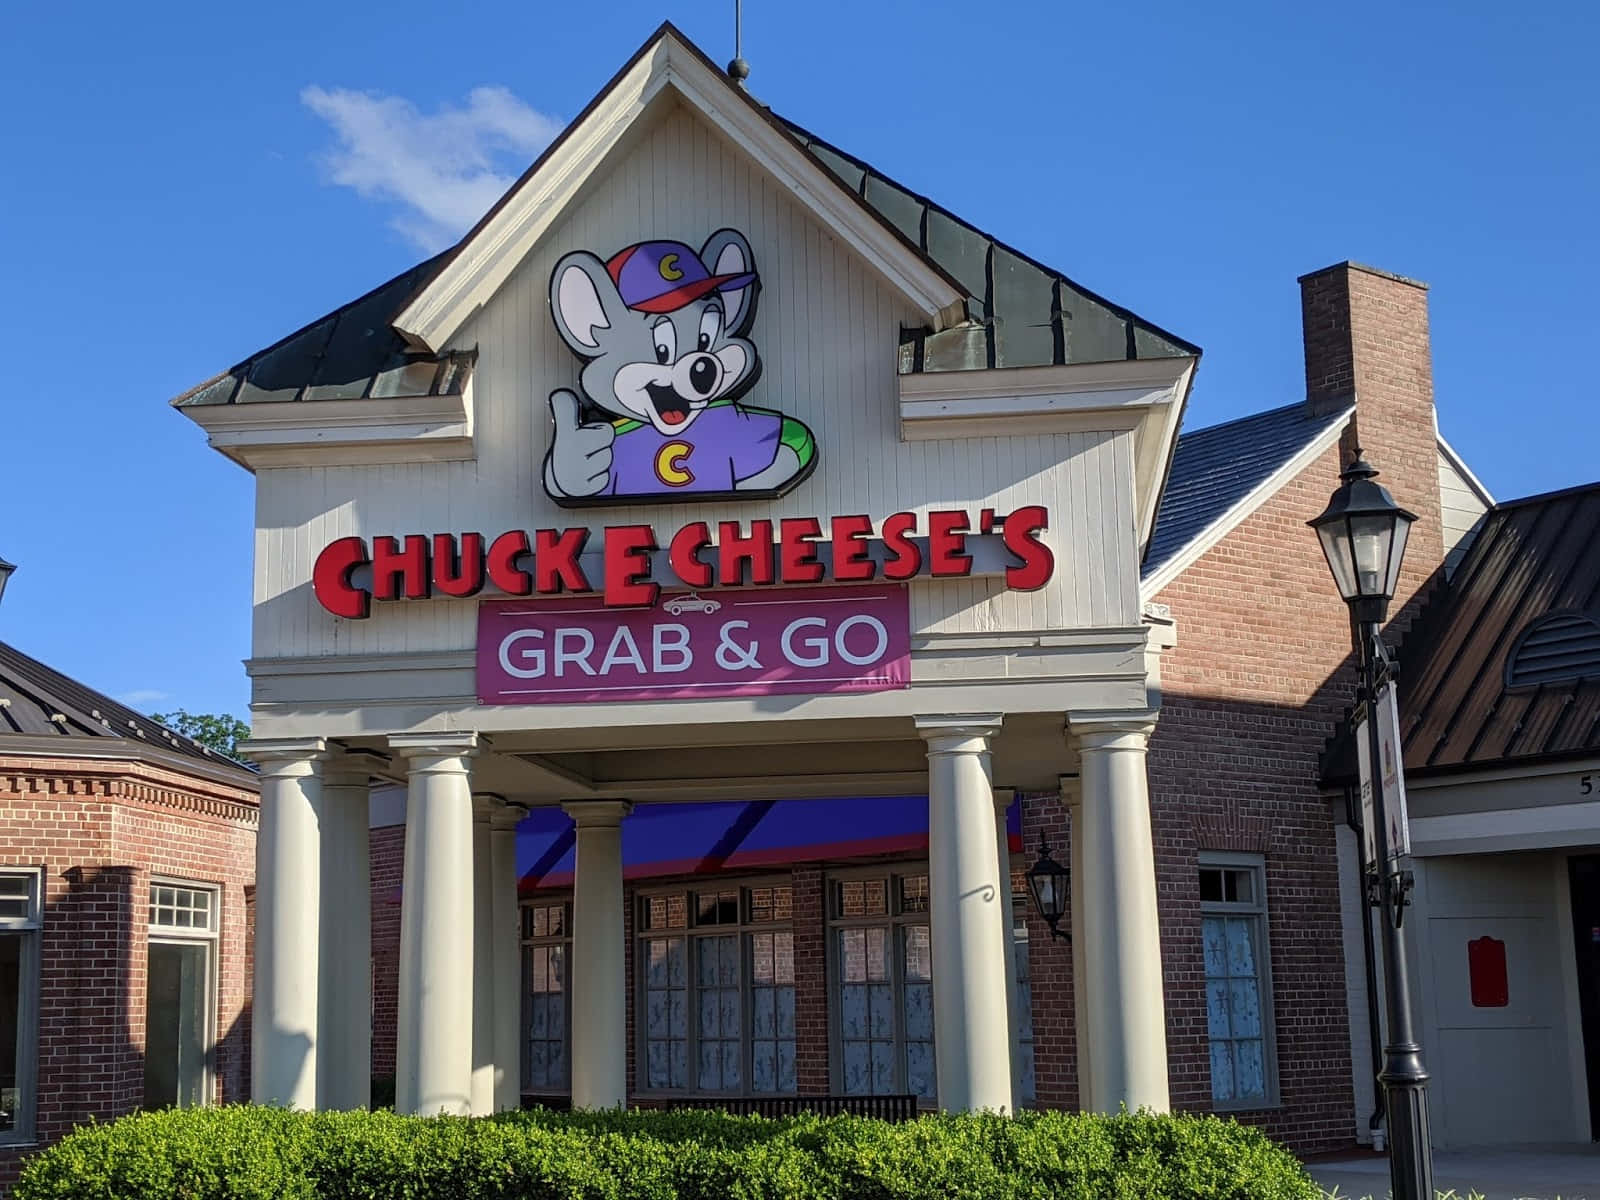 Celebrate Together in a Fun and Safe Environment at Chuck E Cheese